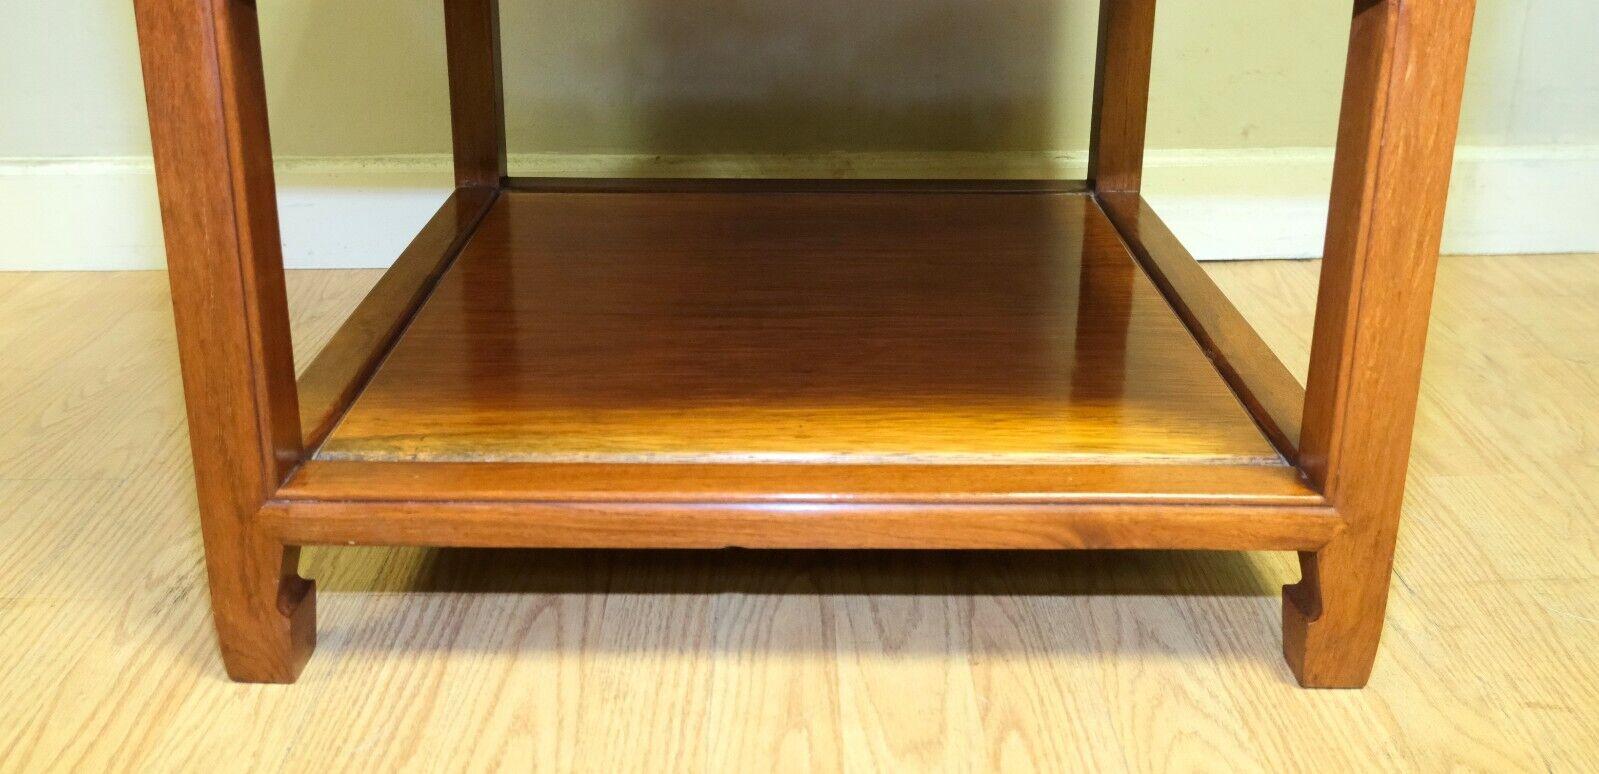 VINTAGE CHINESE HARDWOOD SiDE TABLE WITH DECORATIVE SINGLE DRAWER & SHELF For Sale 2